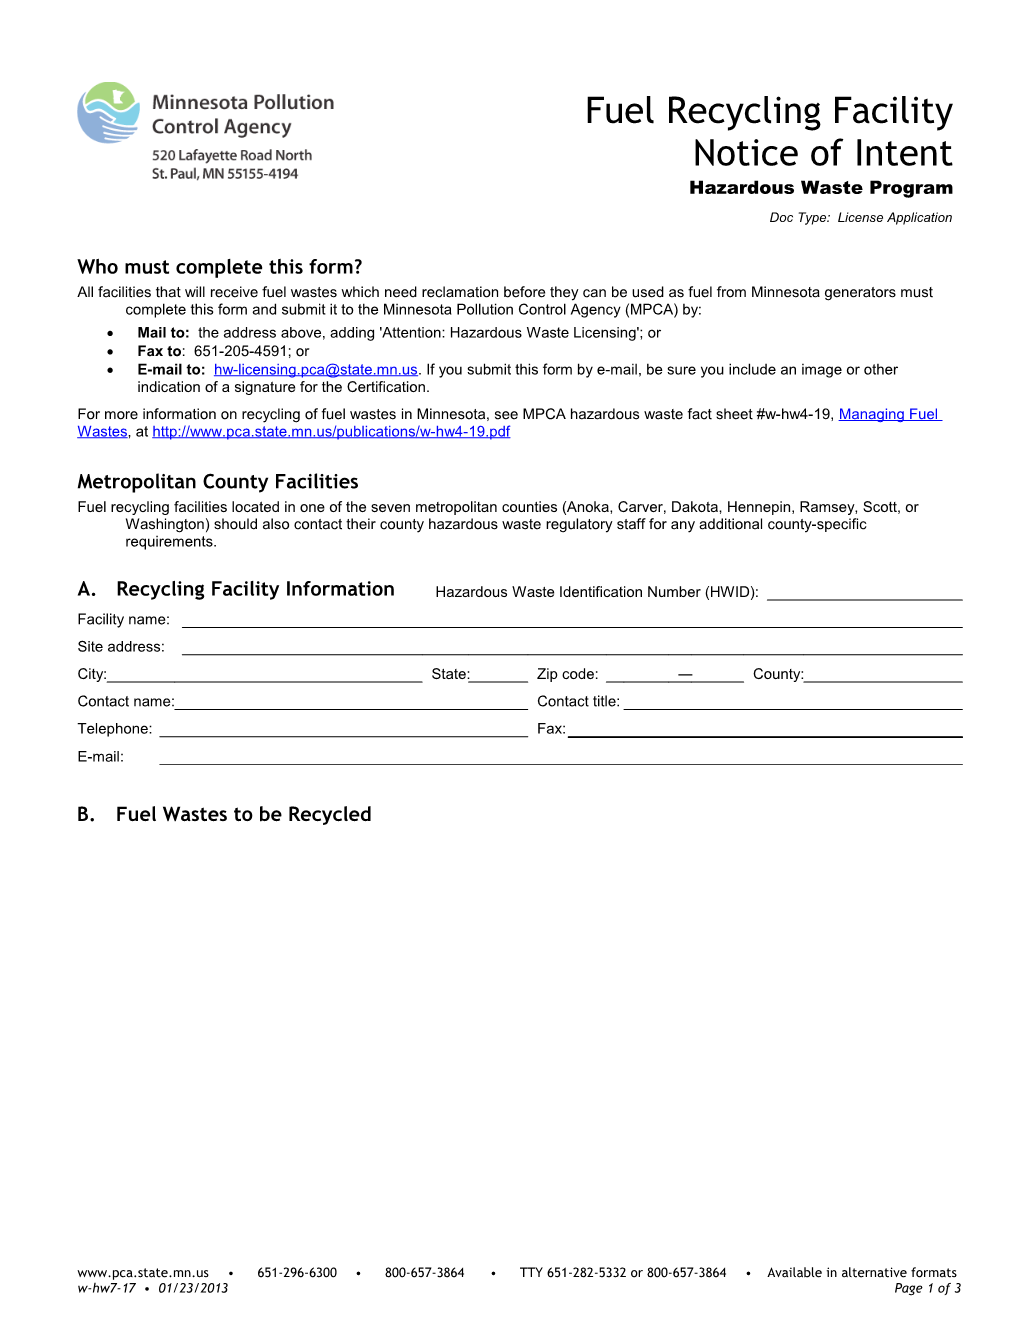 Fuel Recycling Facility Notice of Intent - Form